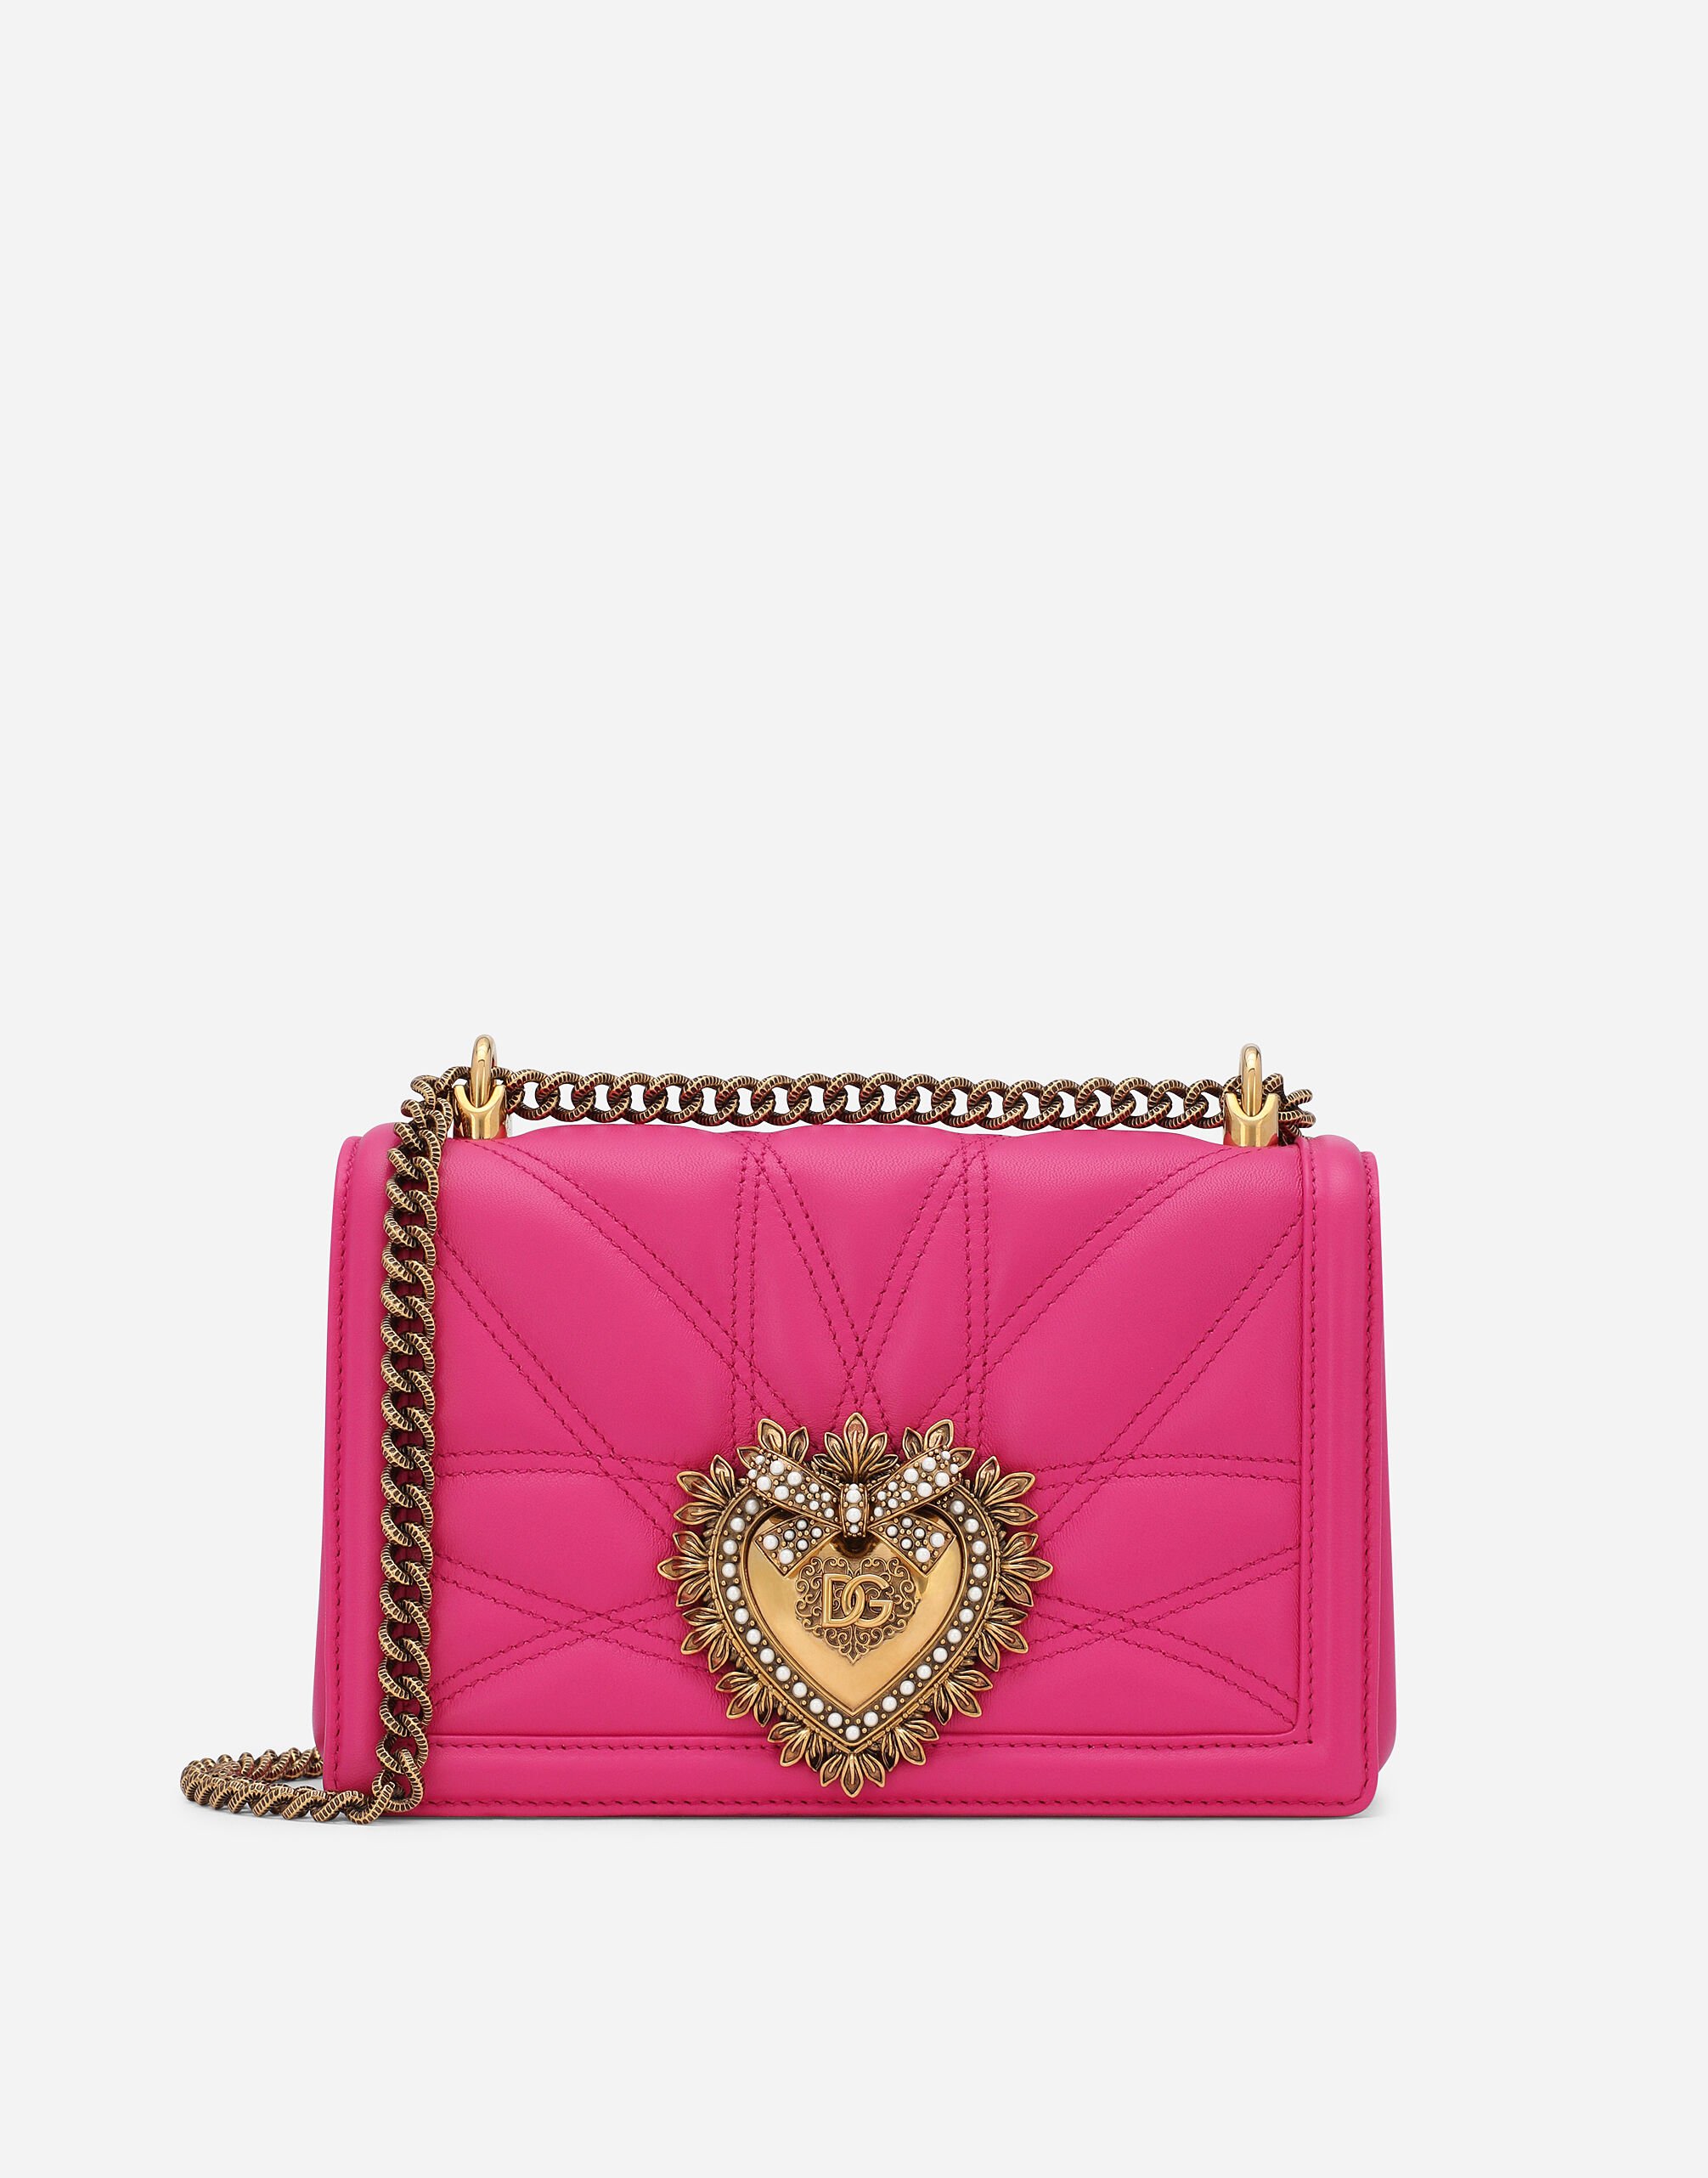 Dolce & Gabbana Medium Devotion bag in quilted nappa leather Pink BB7475A1016